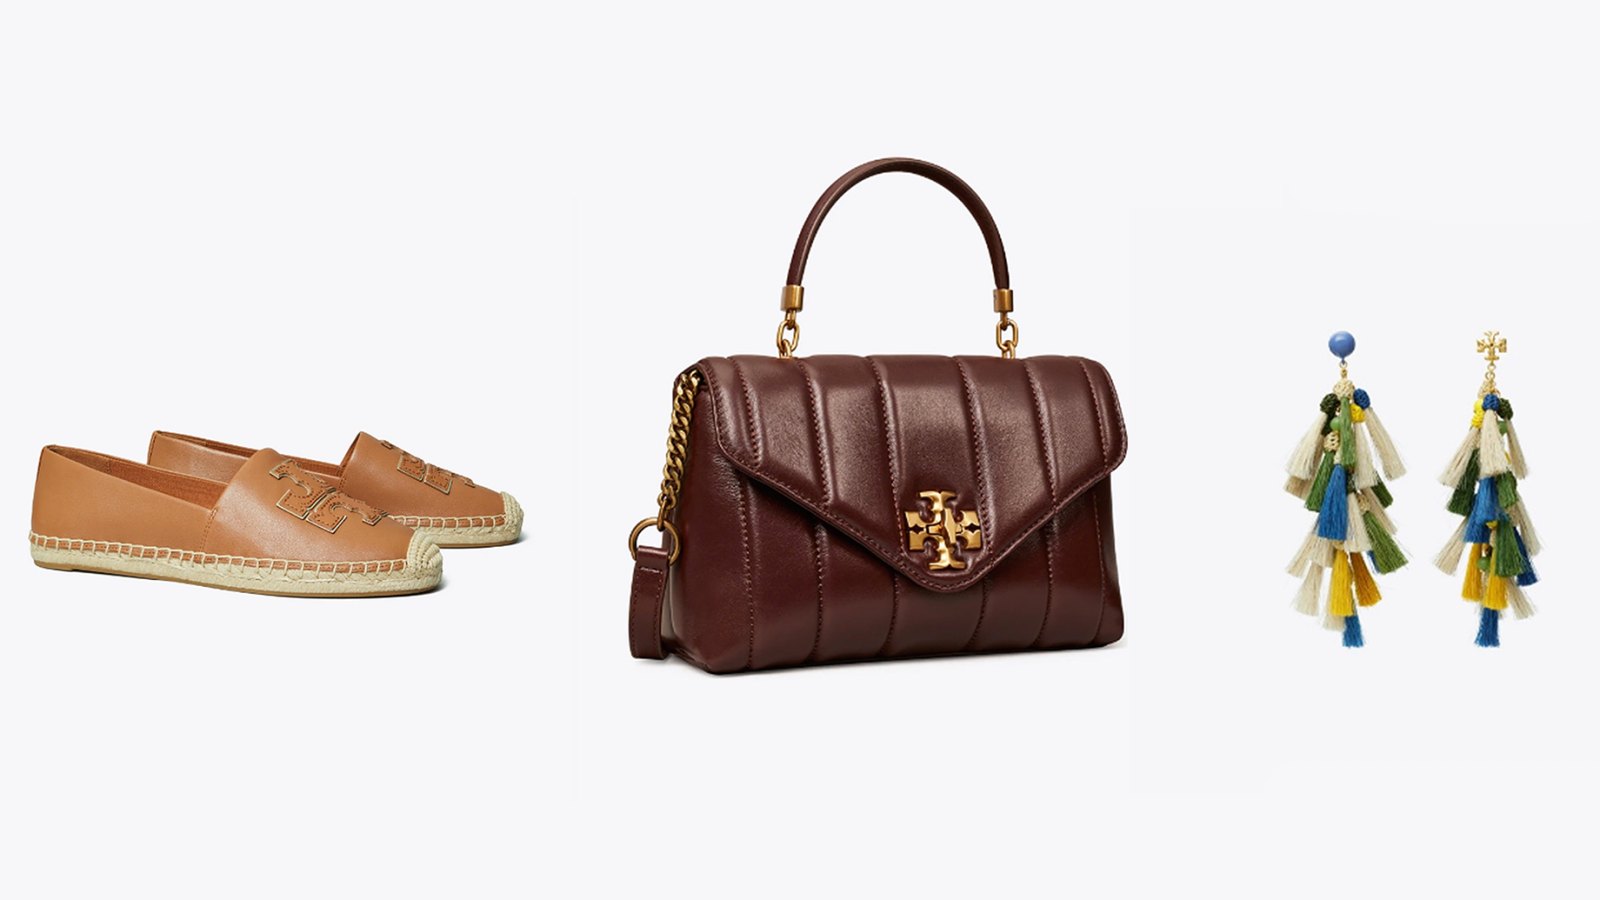 Tory Burch's Most Famous Bag Is at Its Lowest Price Ever for Black Friday  and Cyber Monday